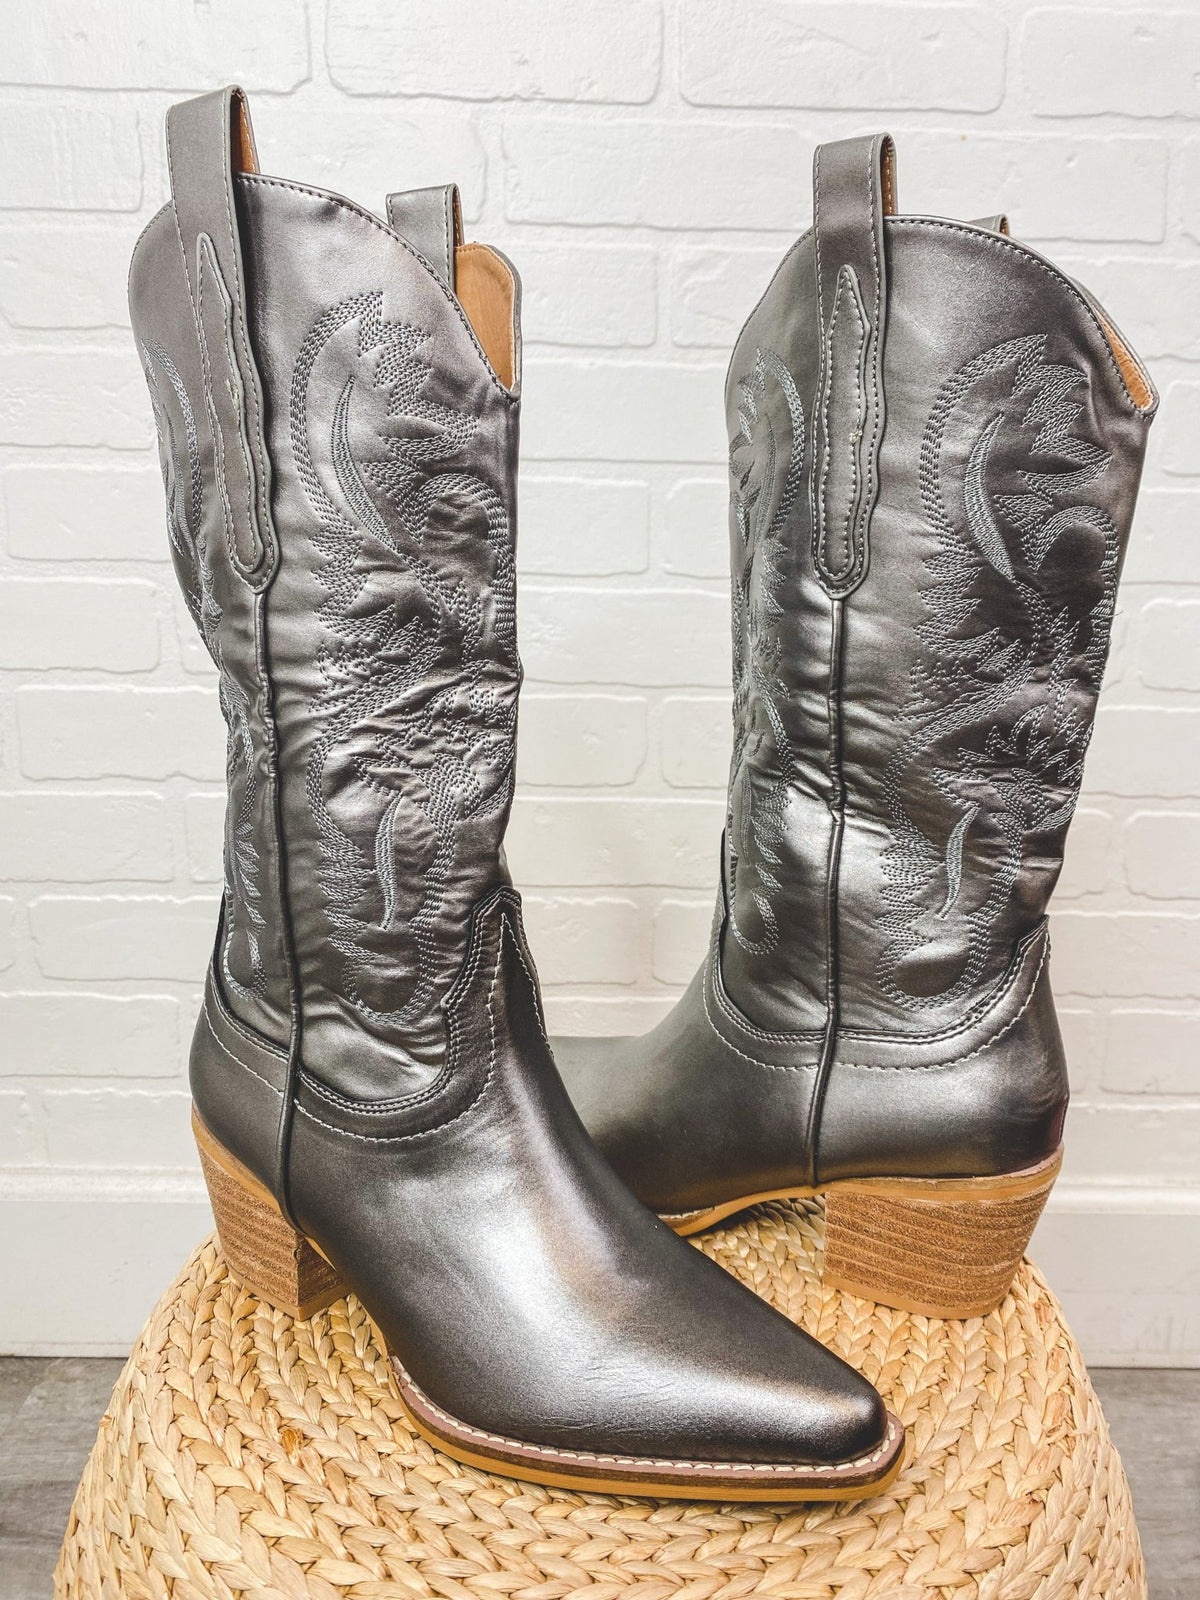 Hanan metallic cowboy boot pewter - Trendy New Year's Eve Outfits at Lush Fashion Lounge Boutique in Oklahoma City